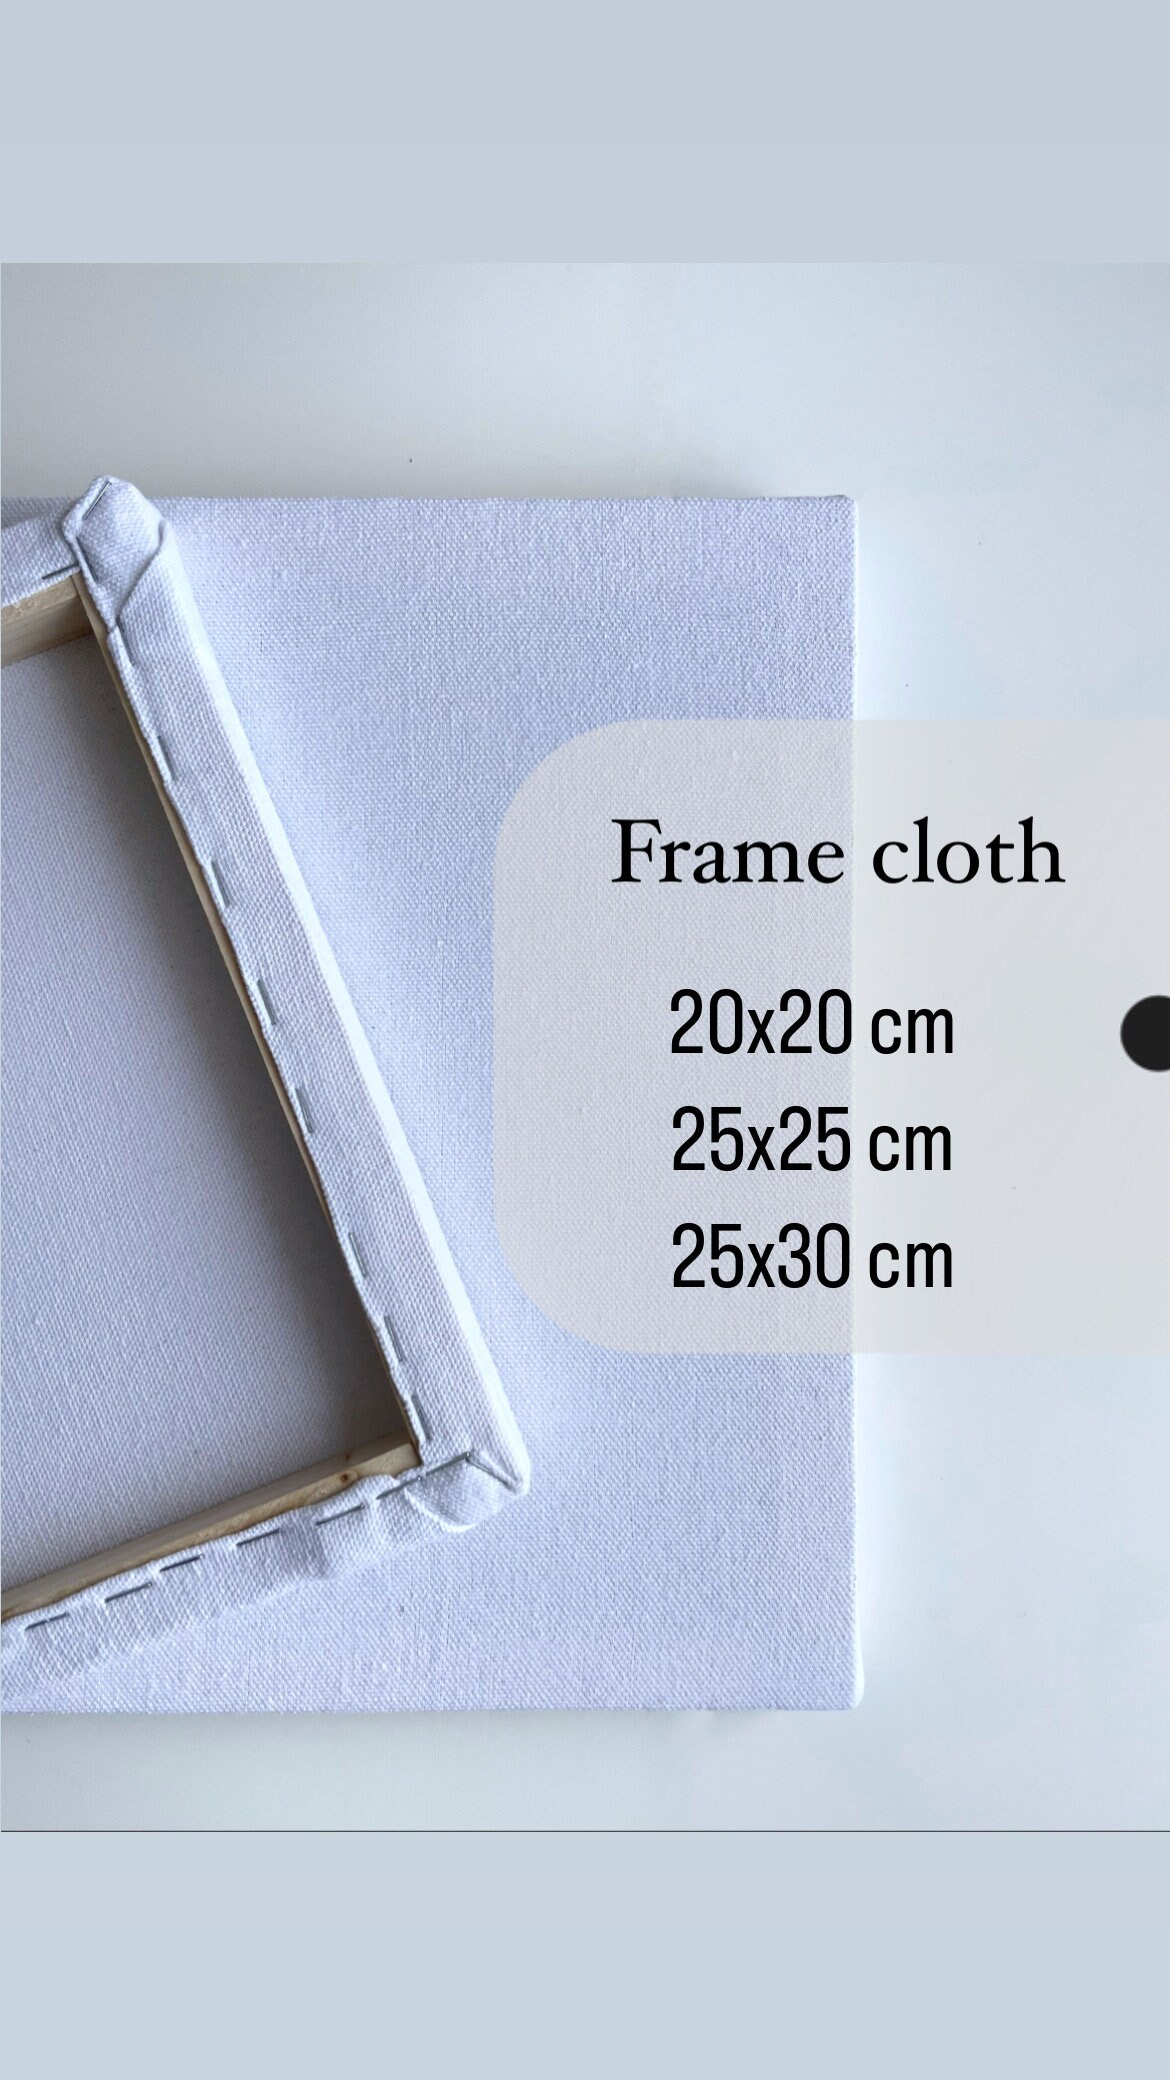 10 (25 cm) X 10 (25 cm) Punch Needle Frame Pre-stretched with Monk's  Cloth, Ready to Use Punch Needle Supply *Listing for ONE Frame